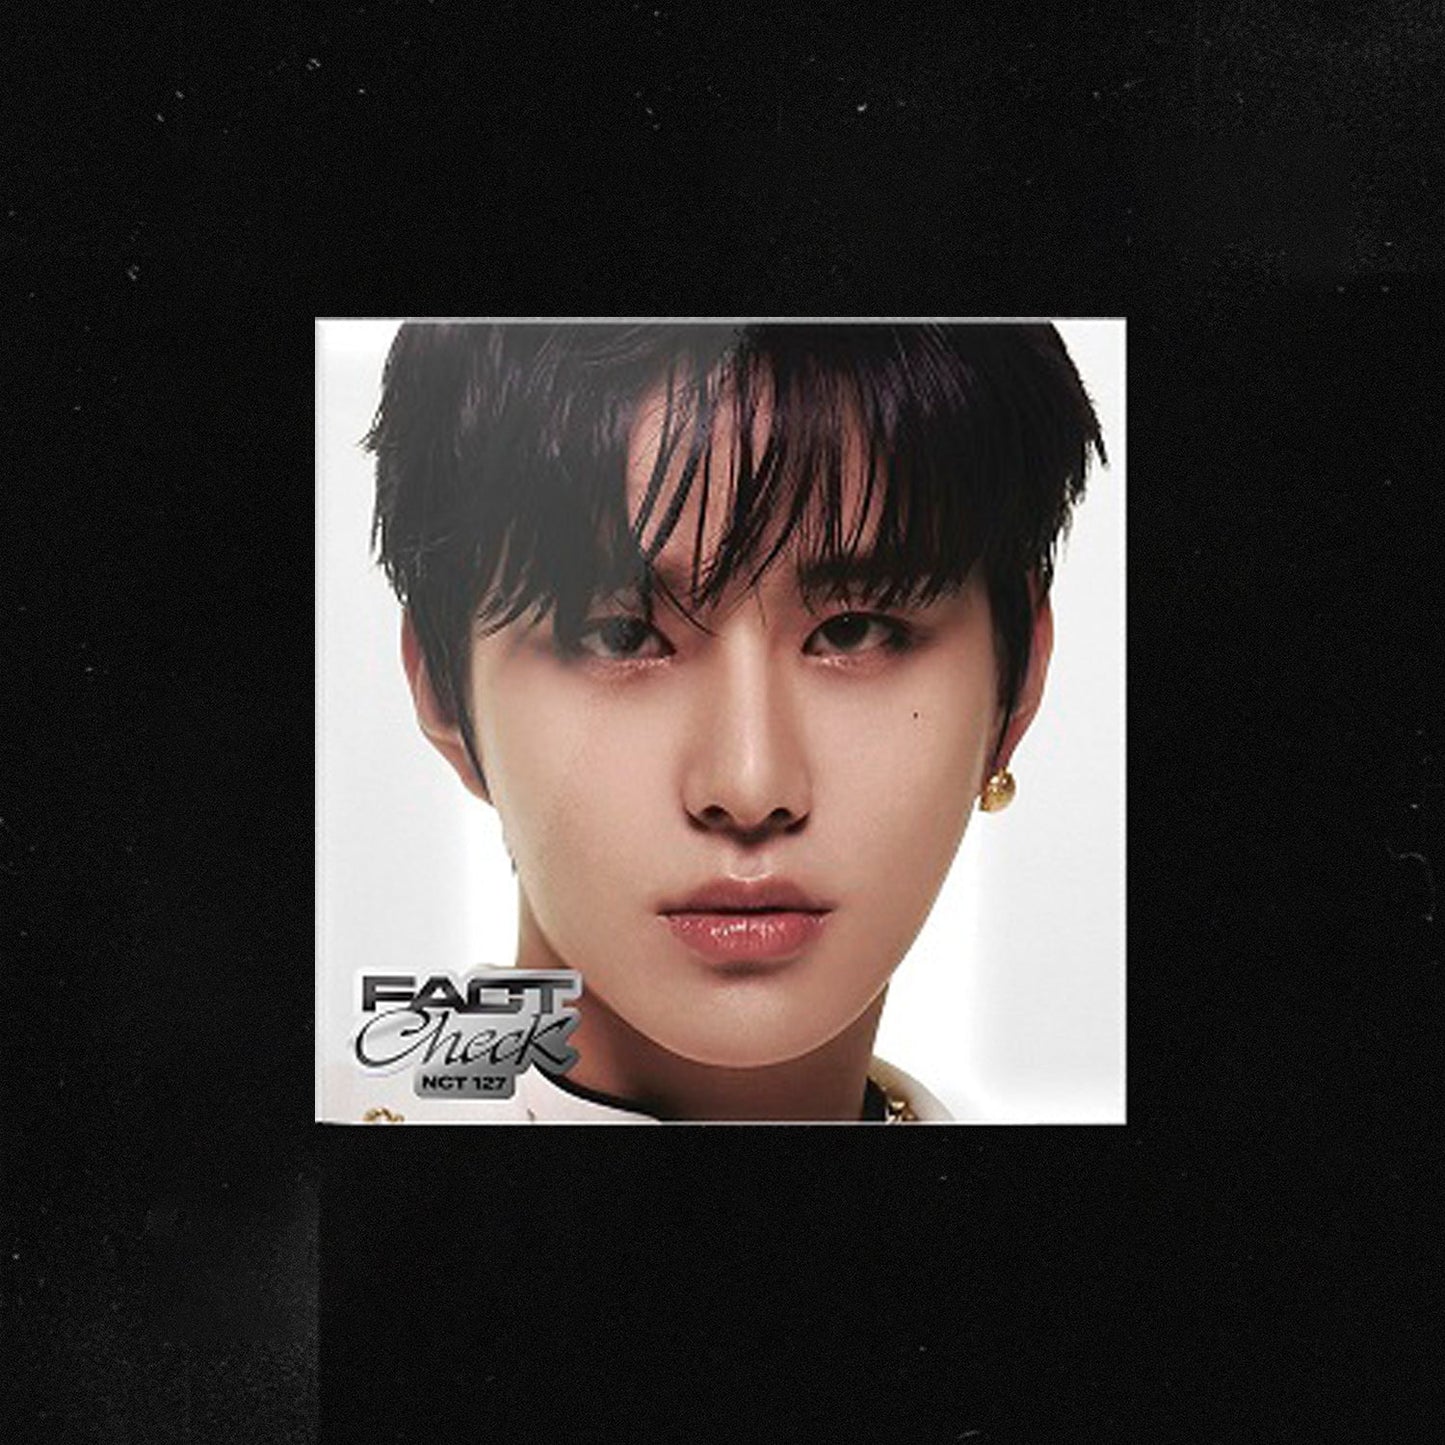 NCT 127 5TH ALBUM 'FACT CHECK' (EXHIBIT) JUNGWOO VERSION COVER